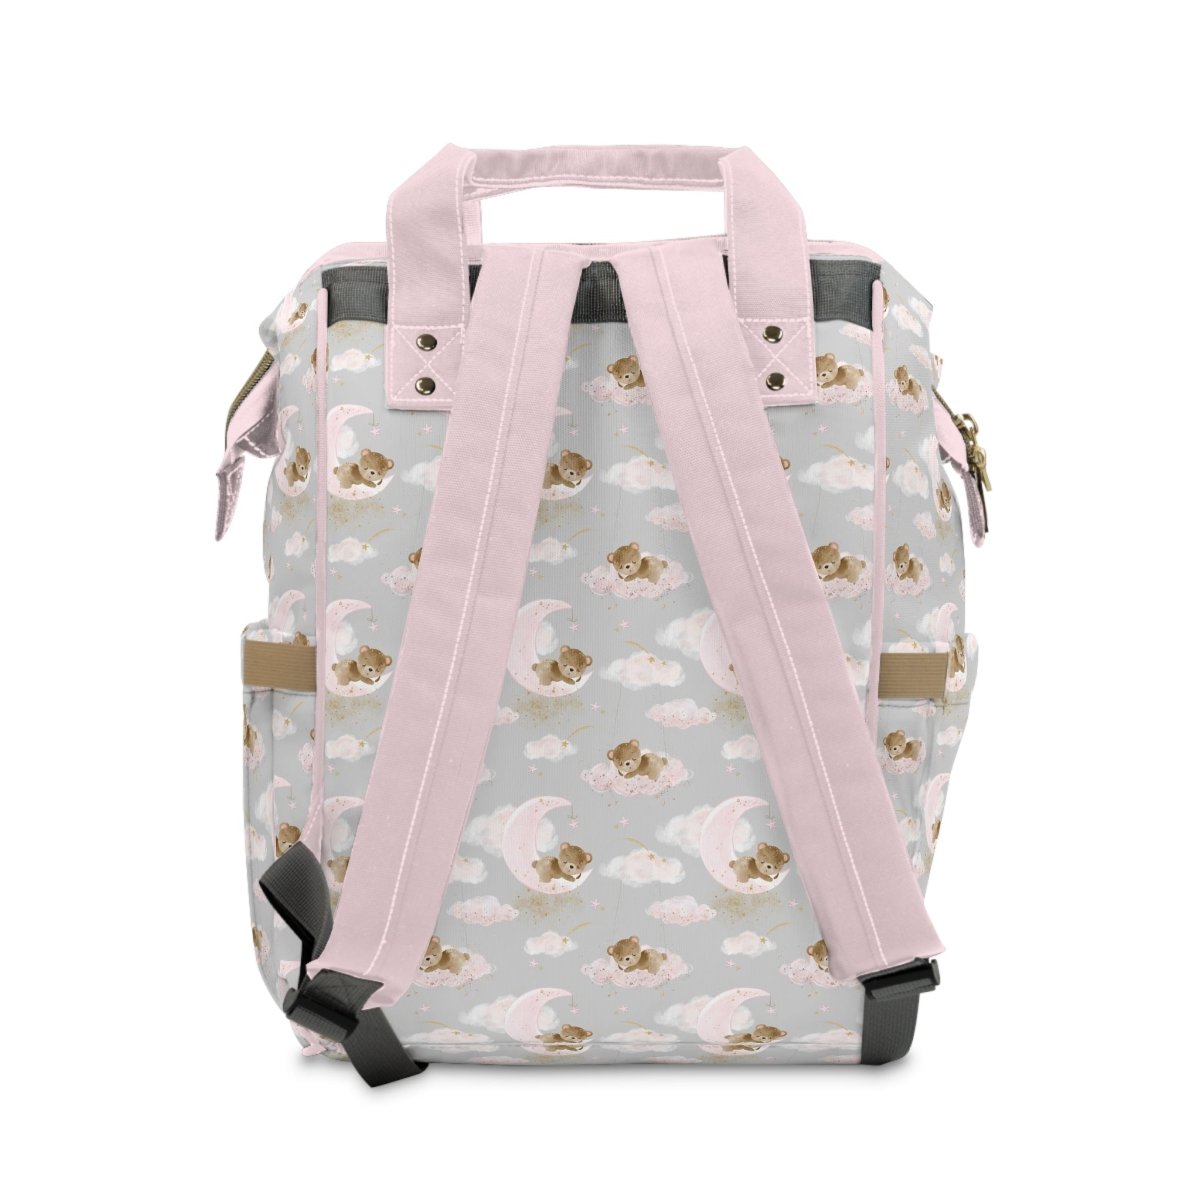 Pink Teddy Bear Personalized Backpack Diaper Bag - gender_girl, Pink Teddy Bear, text